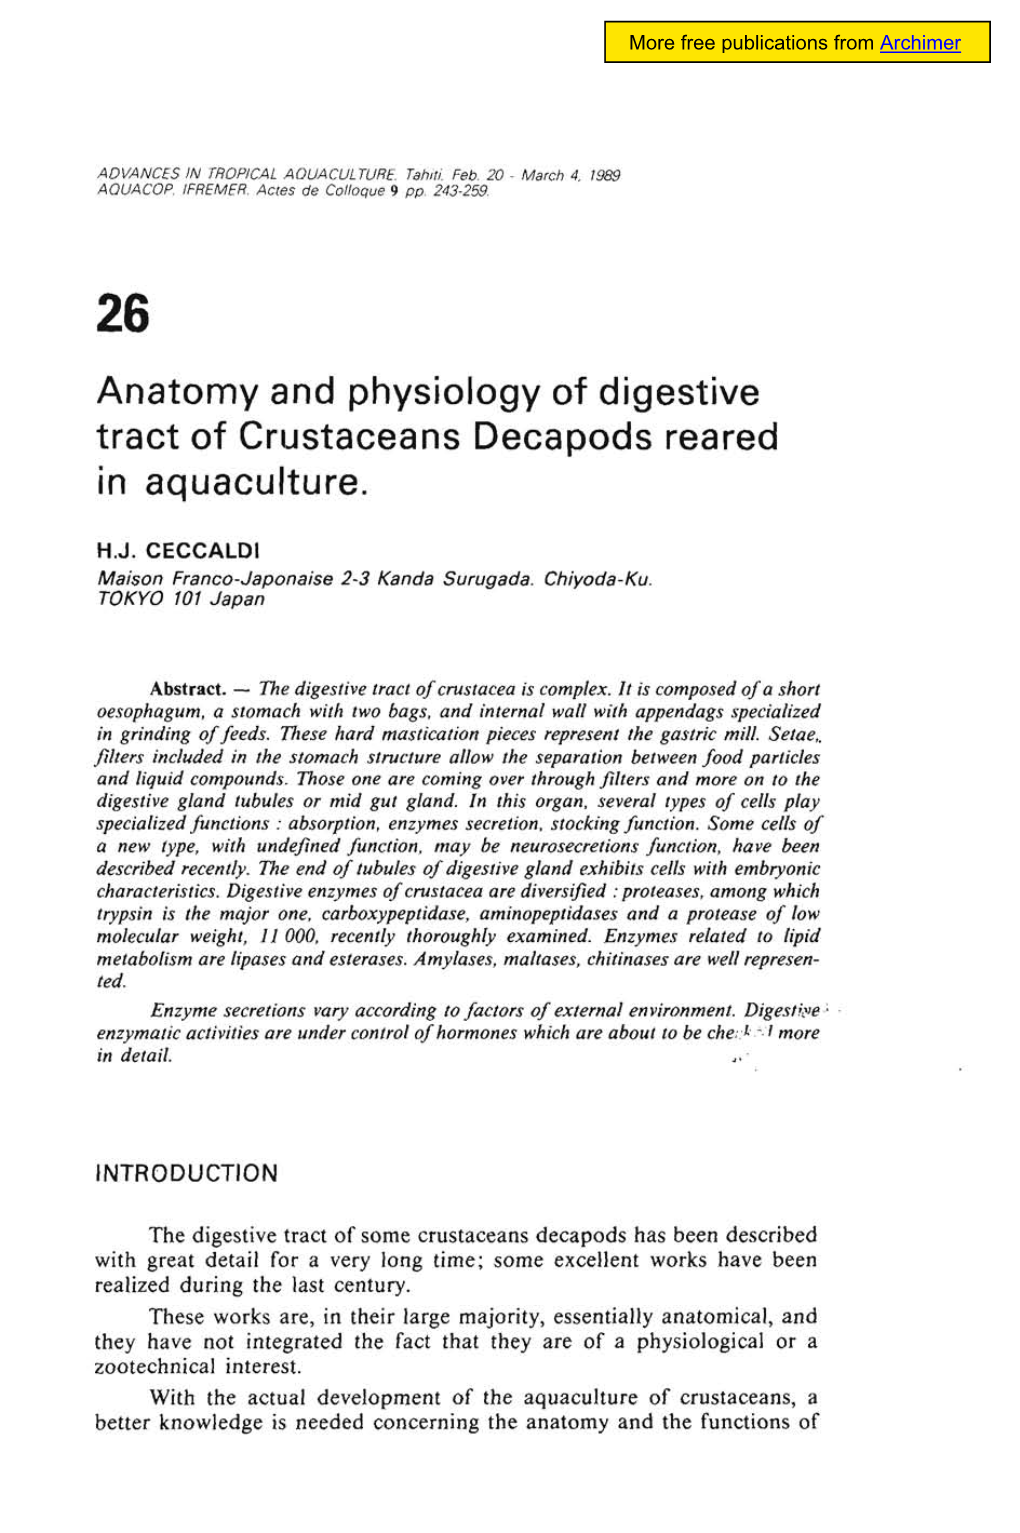 Anatomy and Physiology of Digestive Tract of Crustaceans Decapods Reared in Aquaculture